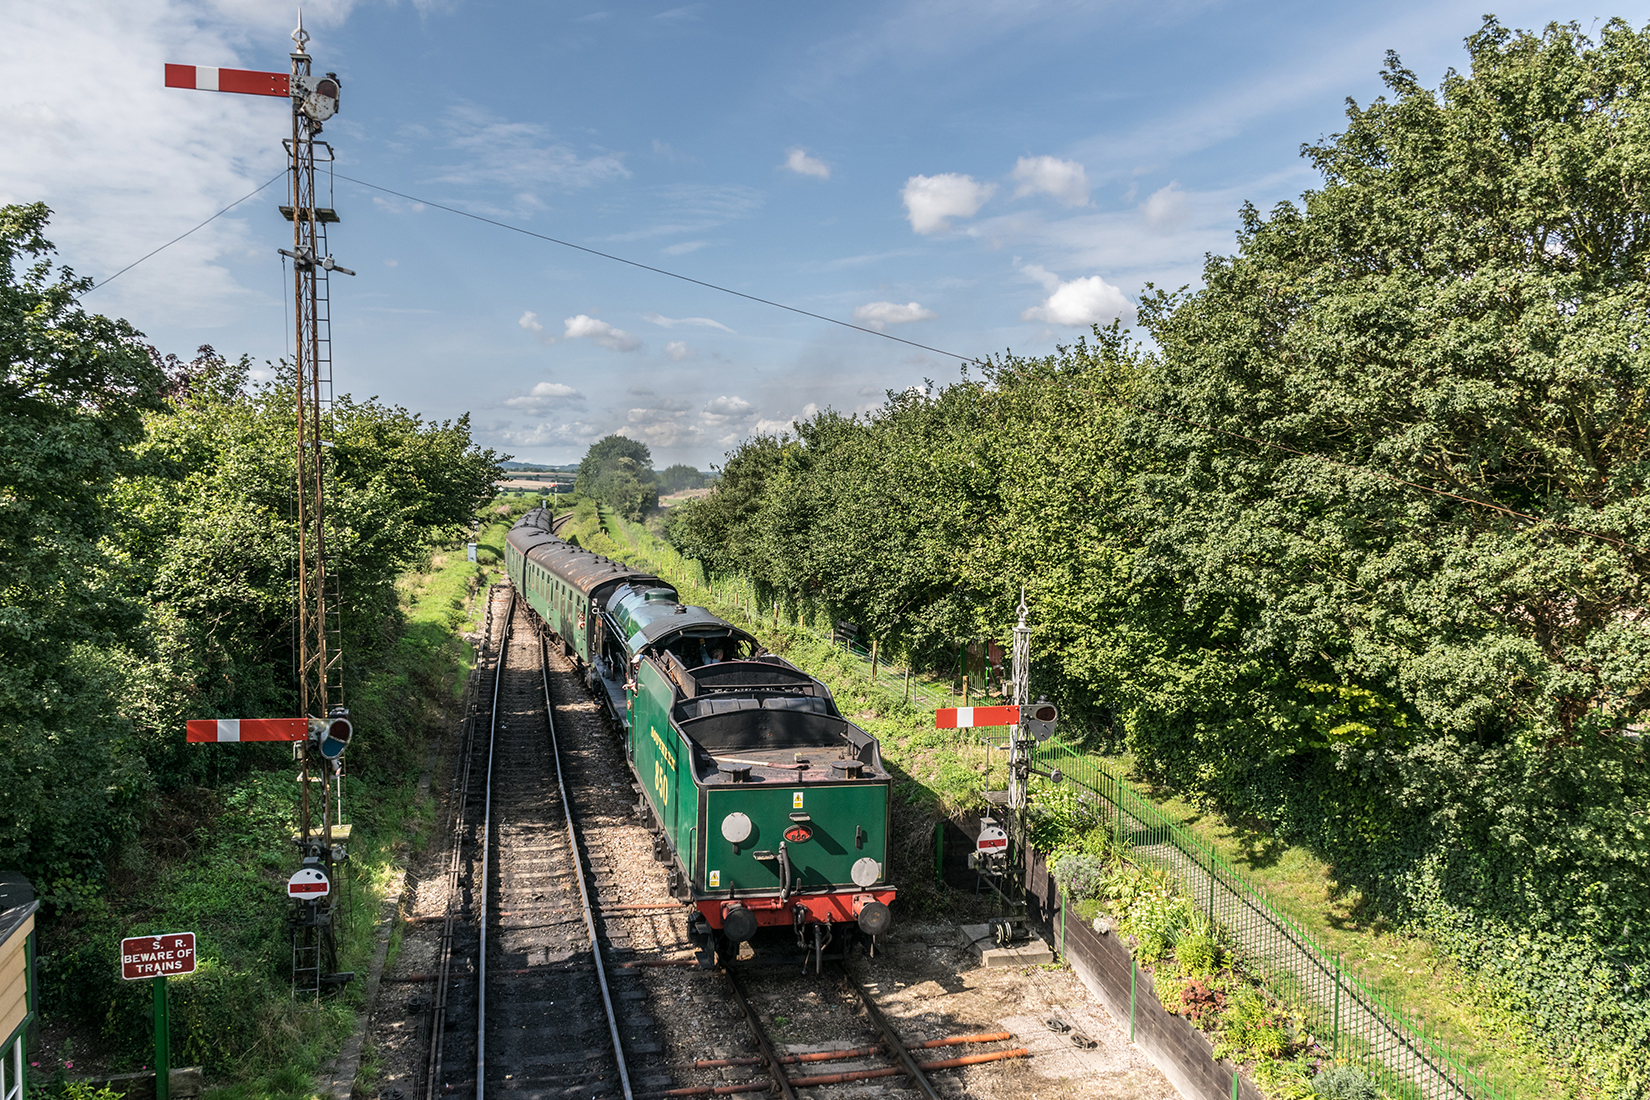 850 'Lord Nelson' pulling into Ropley station with an Alton bound train from Alresford